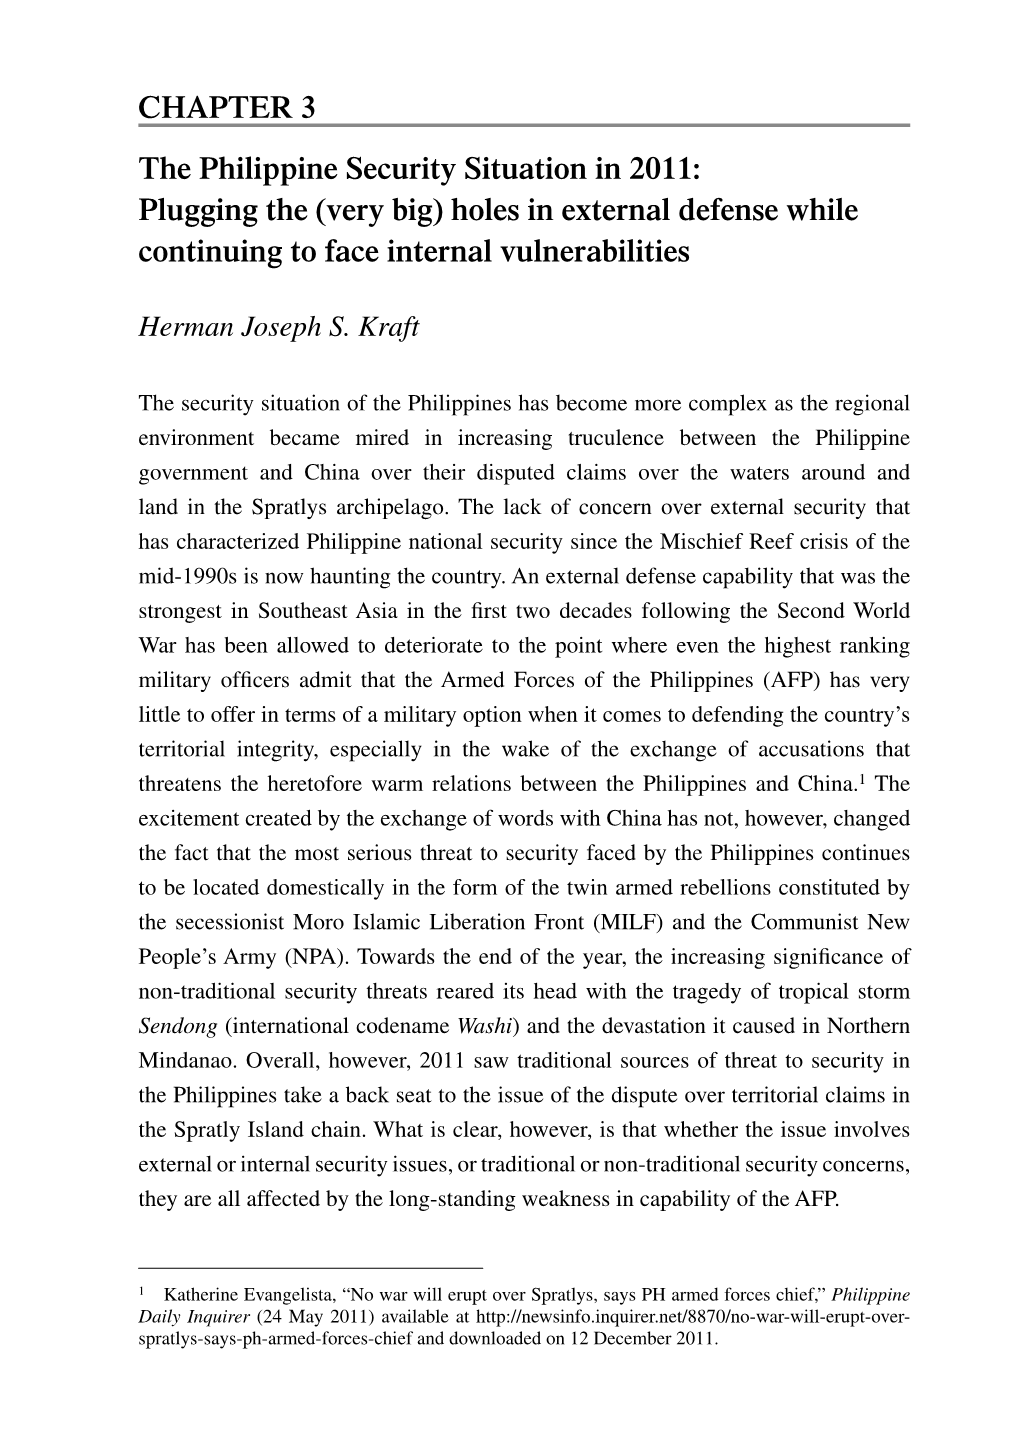 The Philippine Security Situation in 2011: Plugging the (Very Big) Holes in External Defense While Continuing to Face Internal Vulnerabilities